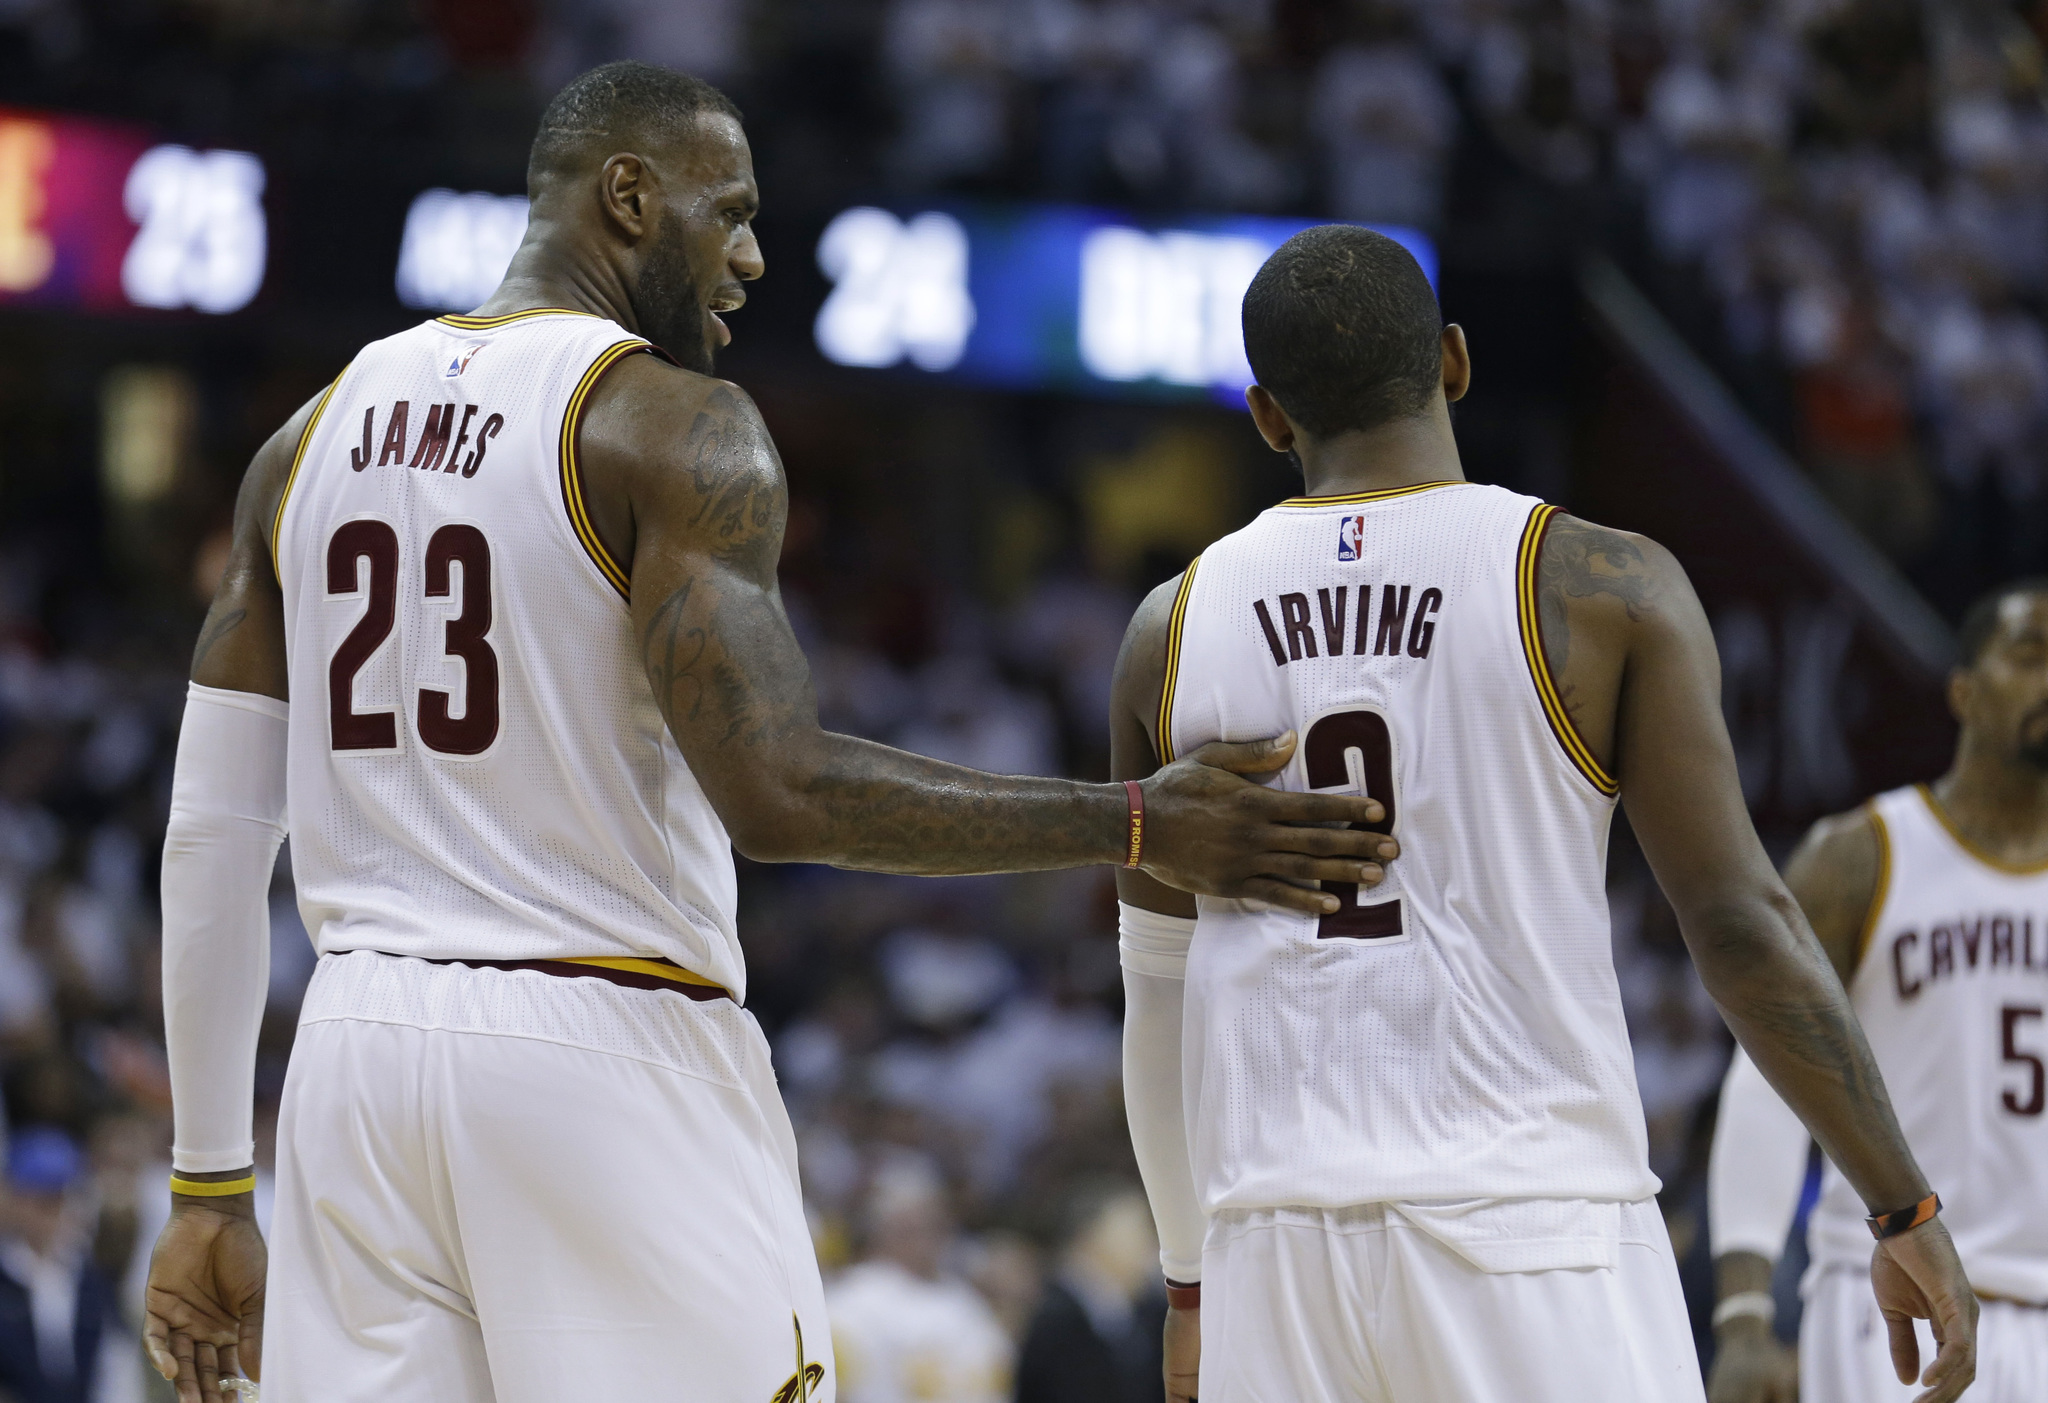 Kyrie Irving and LeBron James played three seasons together in Cleveland.